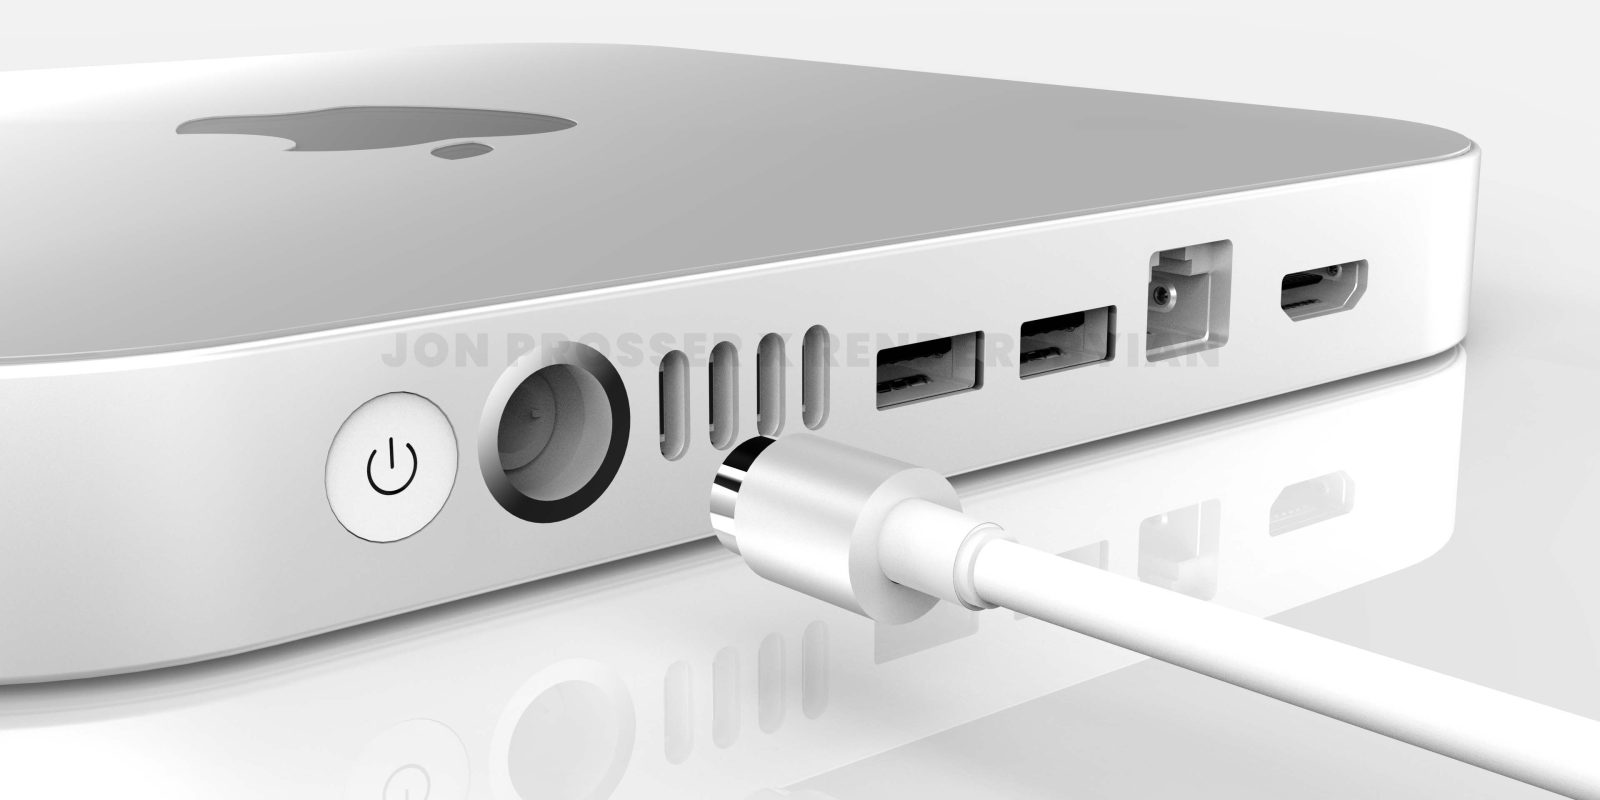 M1X mini reportedly to feature chassis use same magnetic power connector as new iMac - 9to5Mac